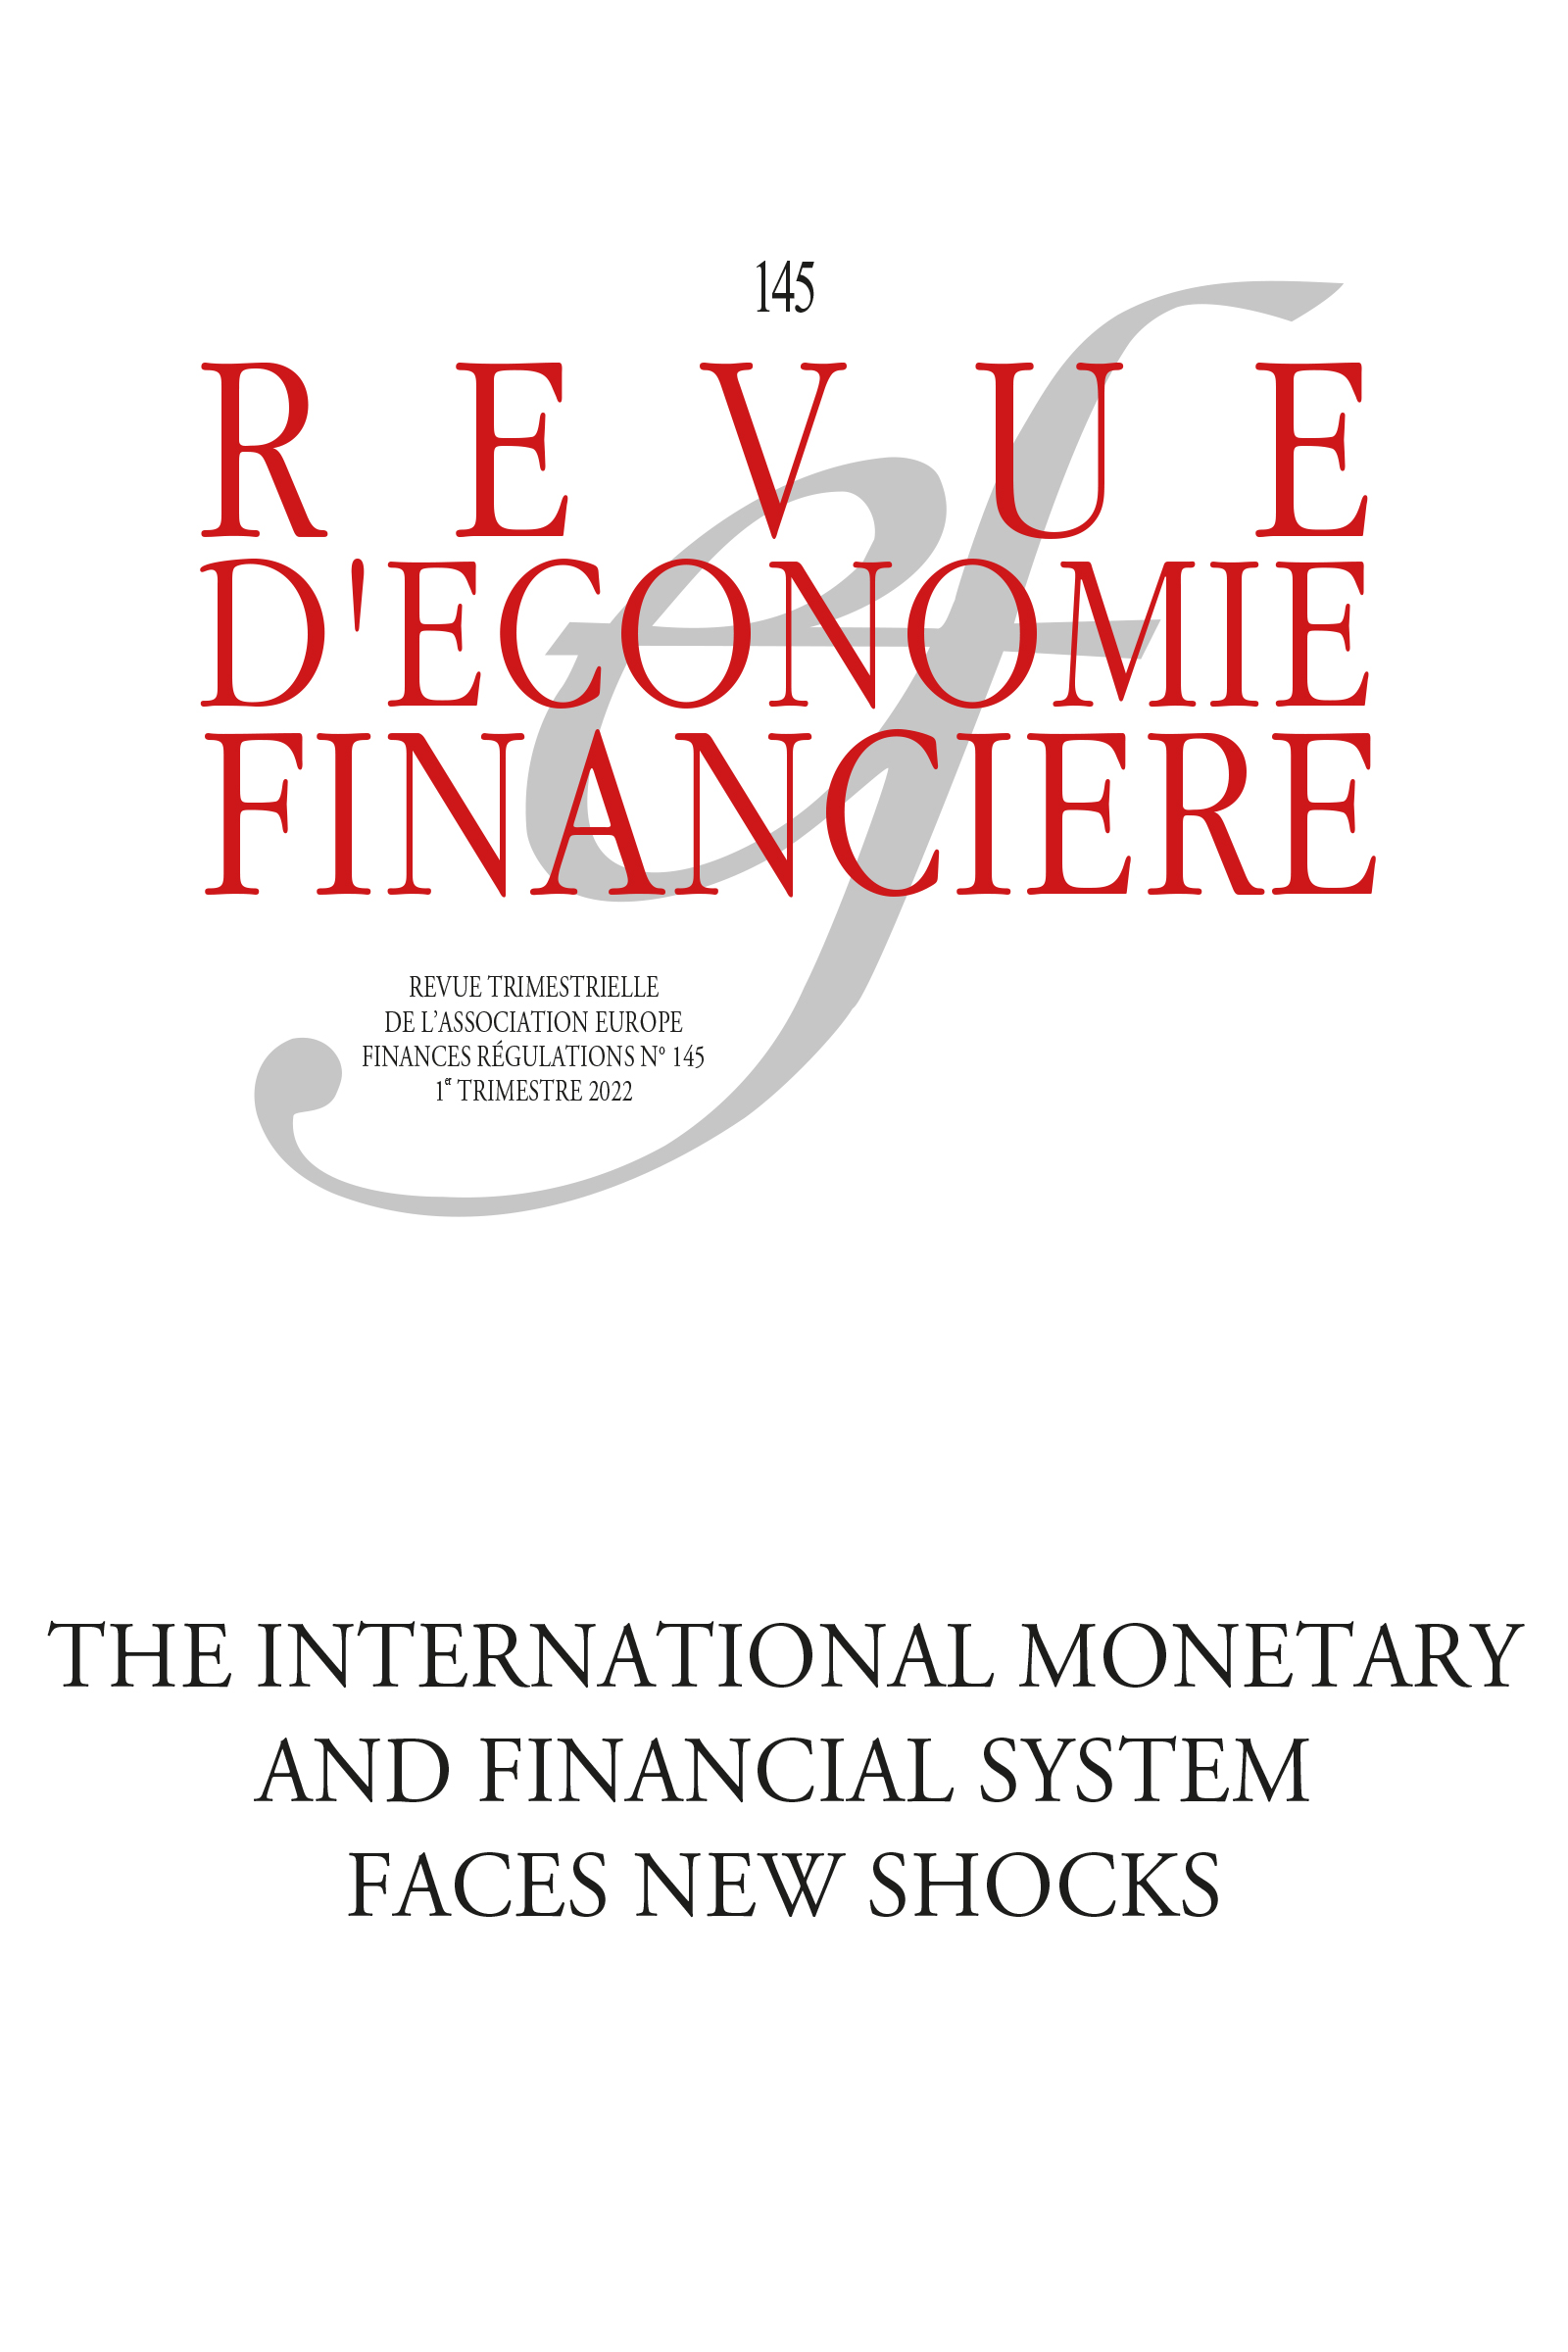 The International Monetary and Financial System Faces New Shocks